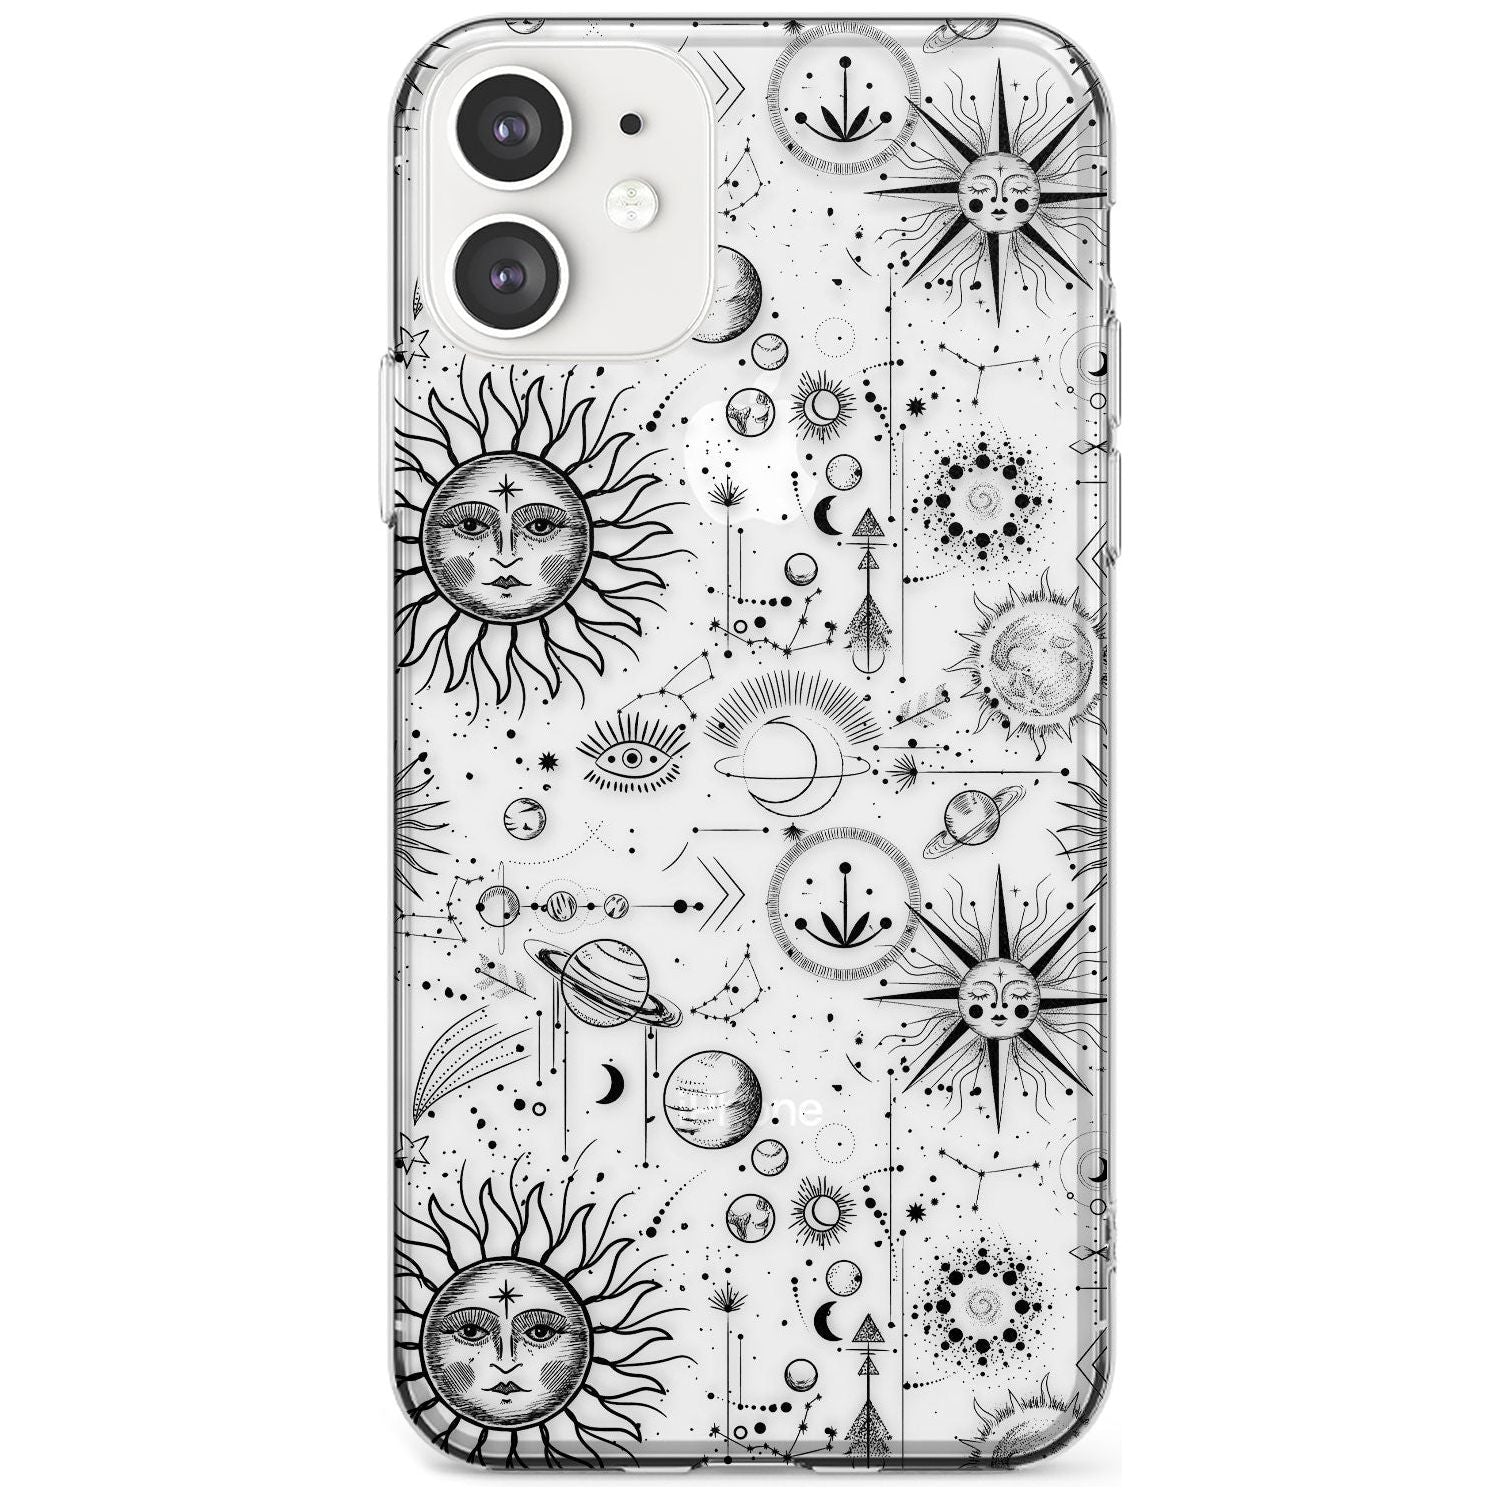 Suns & Planets Astrological Slim TPU Phone Case for iPhone 11